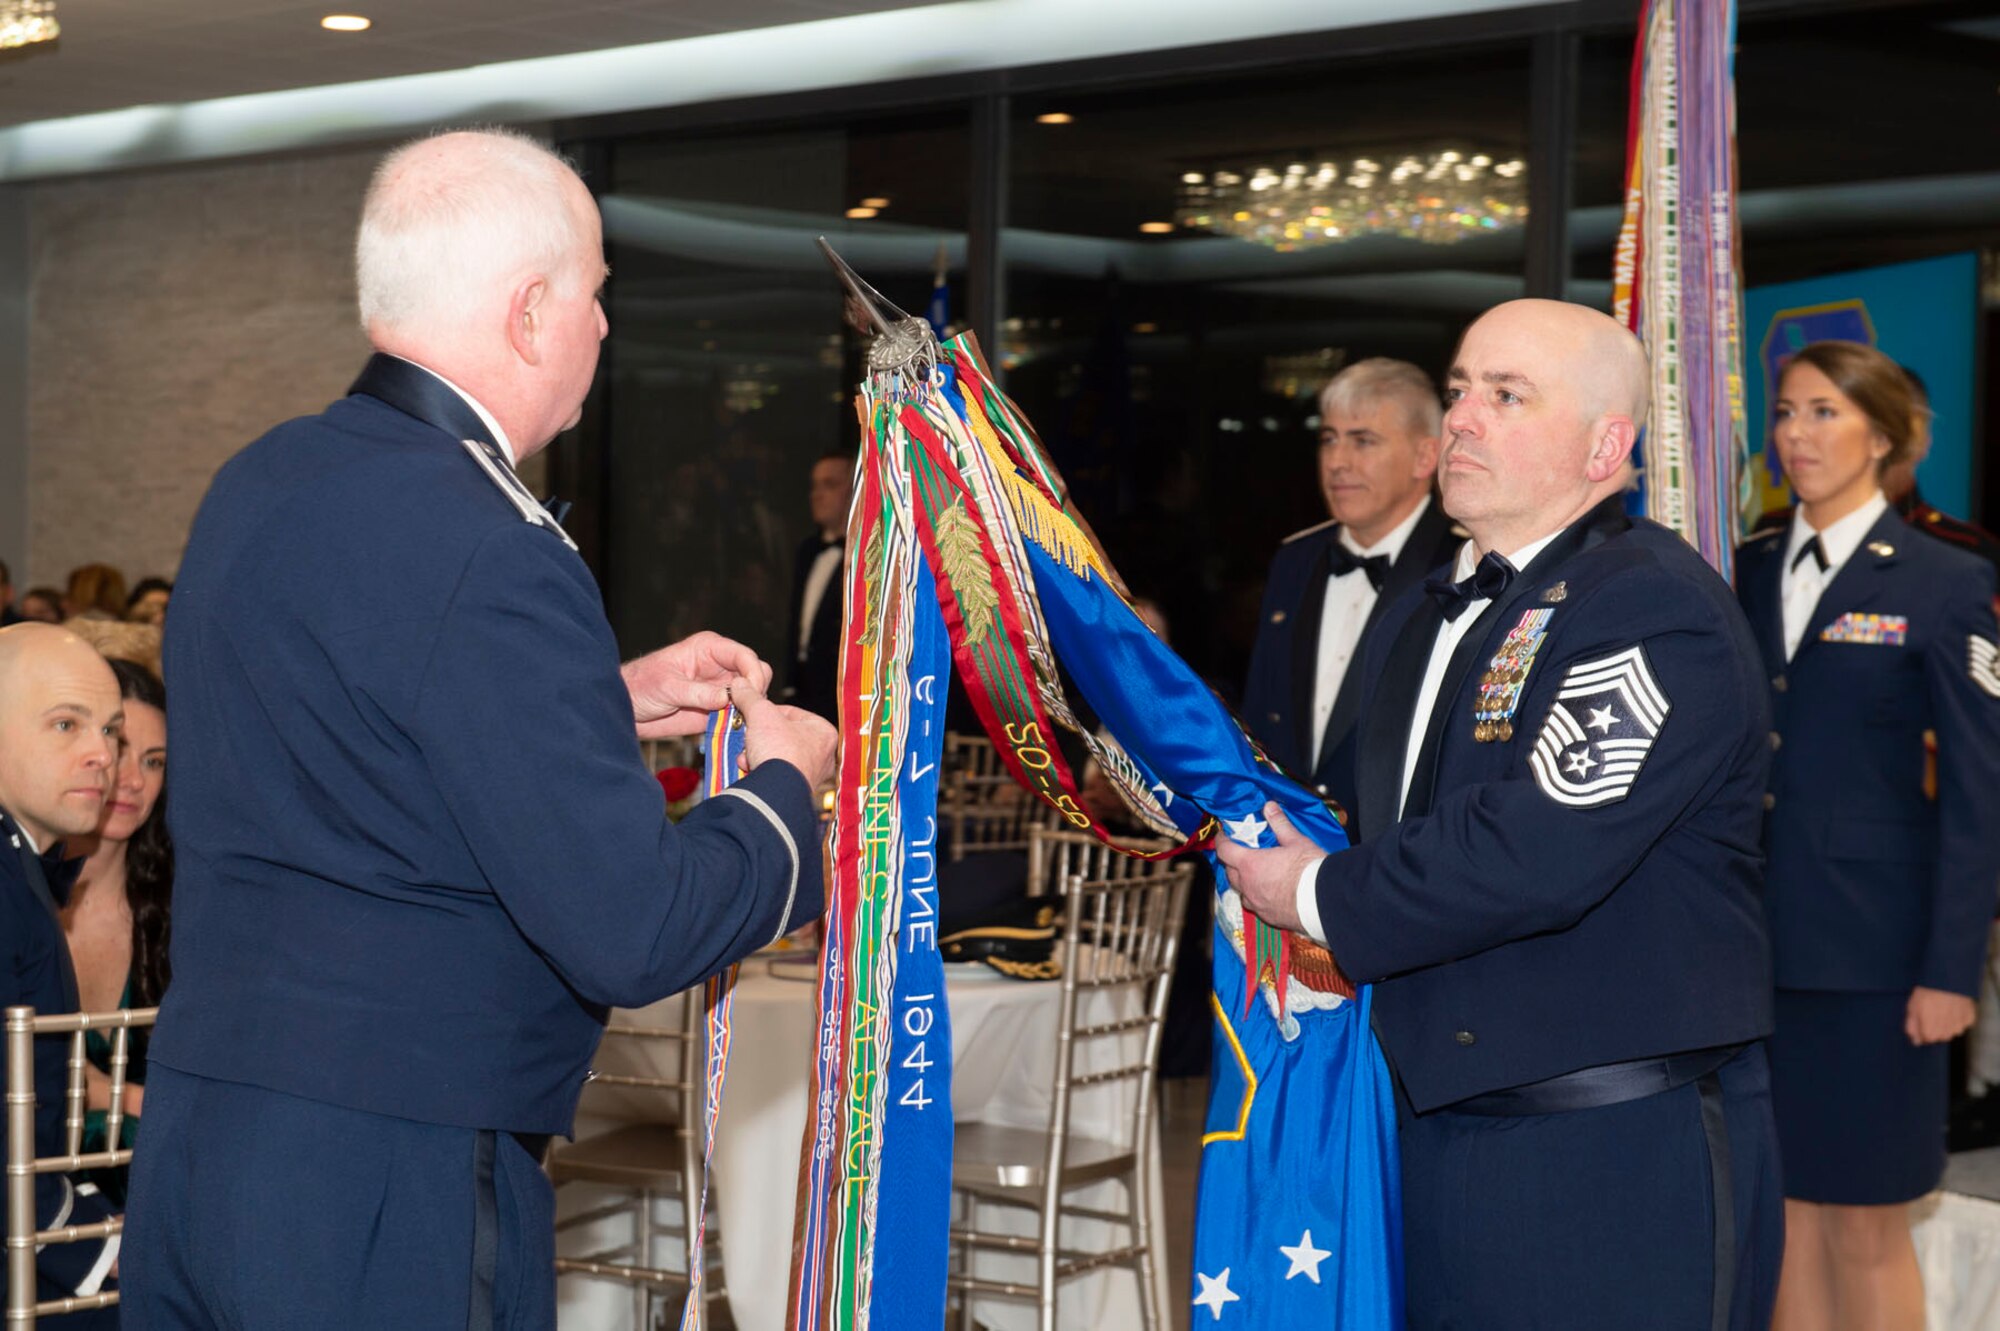 Col. Thom Pemberton, 434th ARW commander, attaches a Global War on Terror service streamer to the wing guidon being held by Chief Master Sgt. Brian Jensenius, 434th ARW command chief during a pinning ceremony held during the 80th Anniversary Ball. After Pemberton pinned on the streamer to the wing's guidon, each squadron attached one to their own guidon. Photo by Master Sgt. Rachel Barton